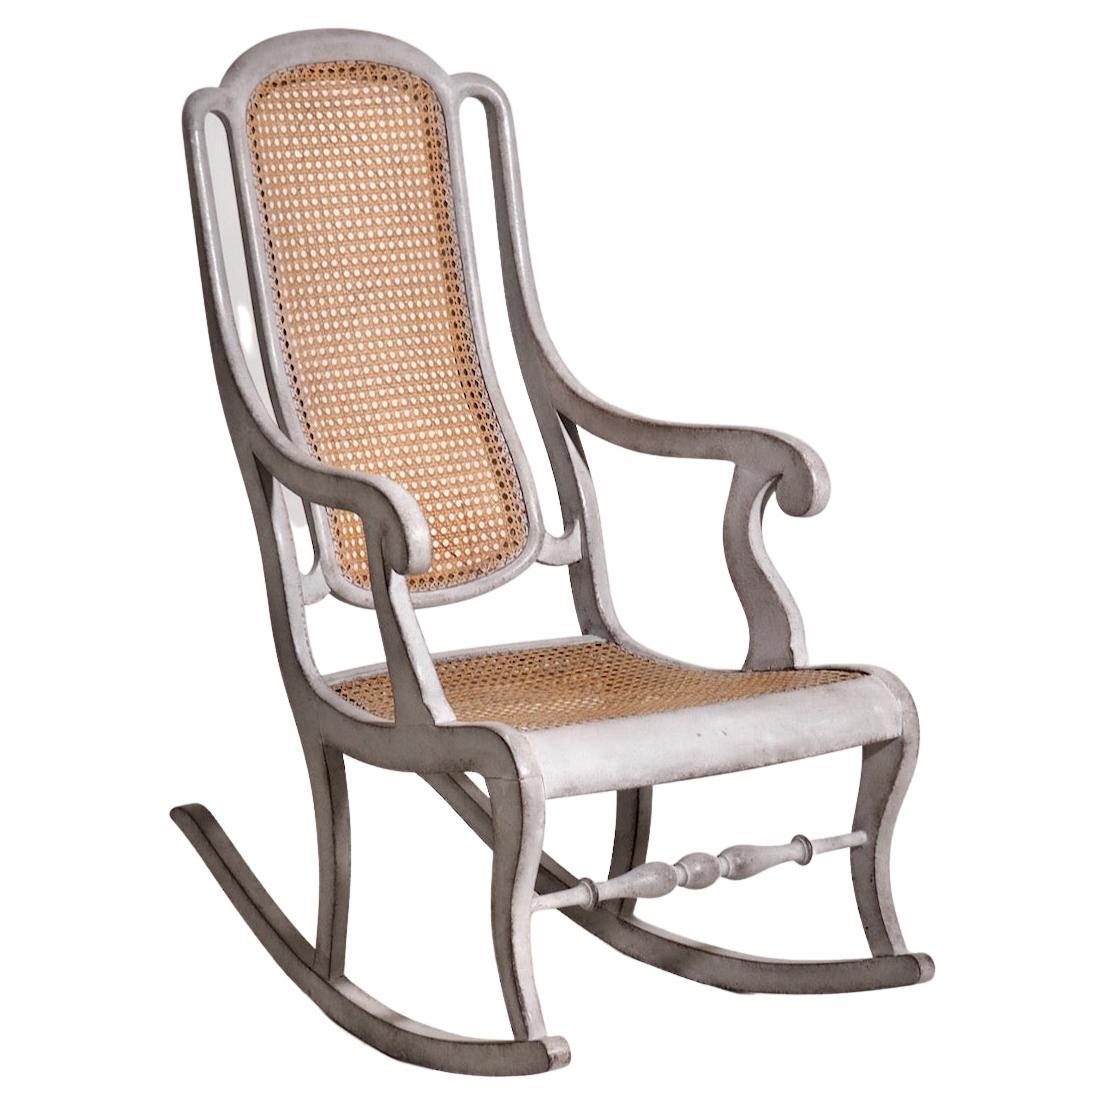 What is a Boston rocking chair?